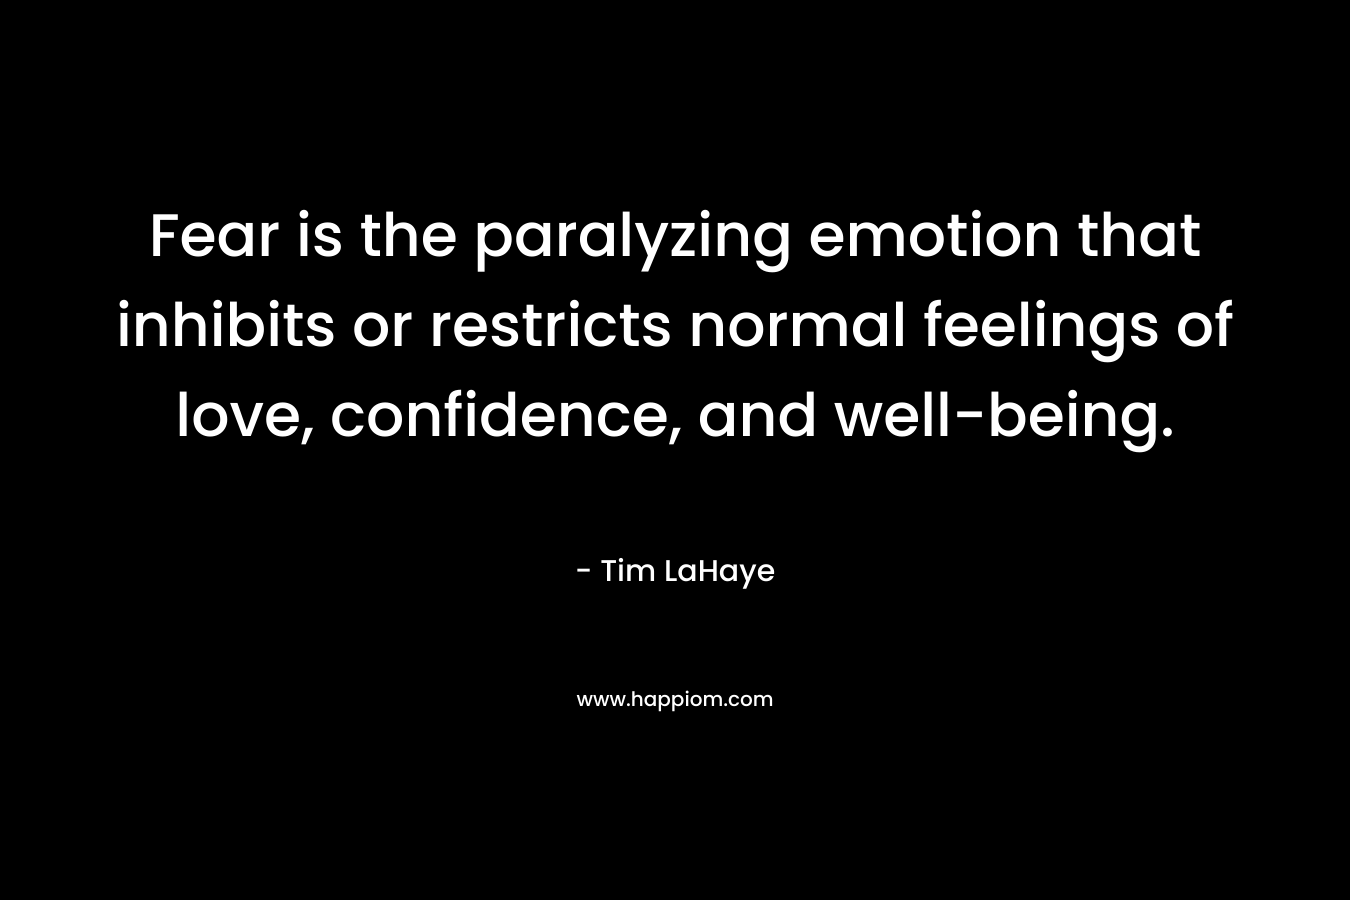 Fear is the paralyzing emotion that inhibits or restricts normal feelings of love, confidence, and well-being. – Tim LaHaye